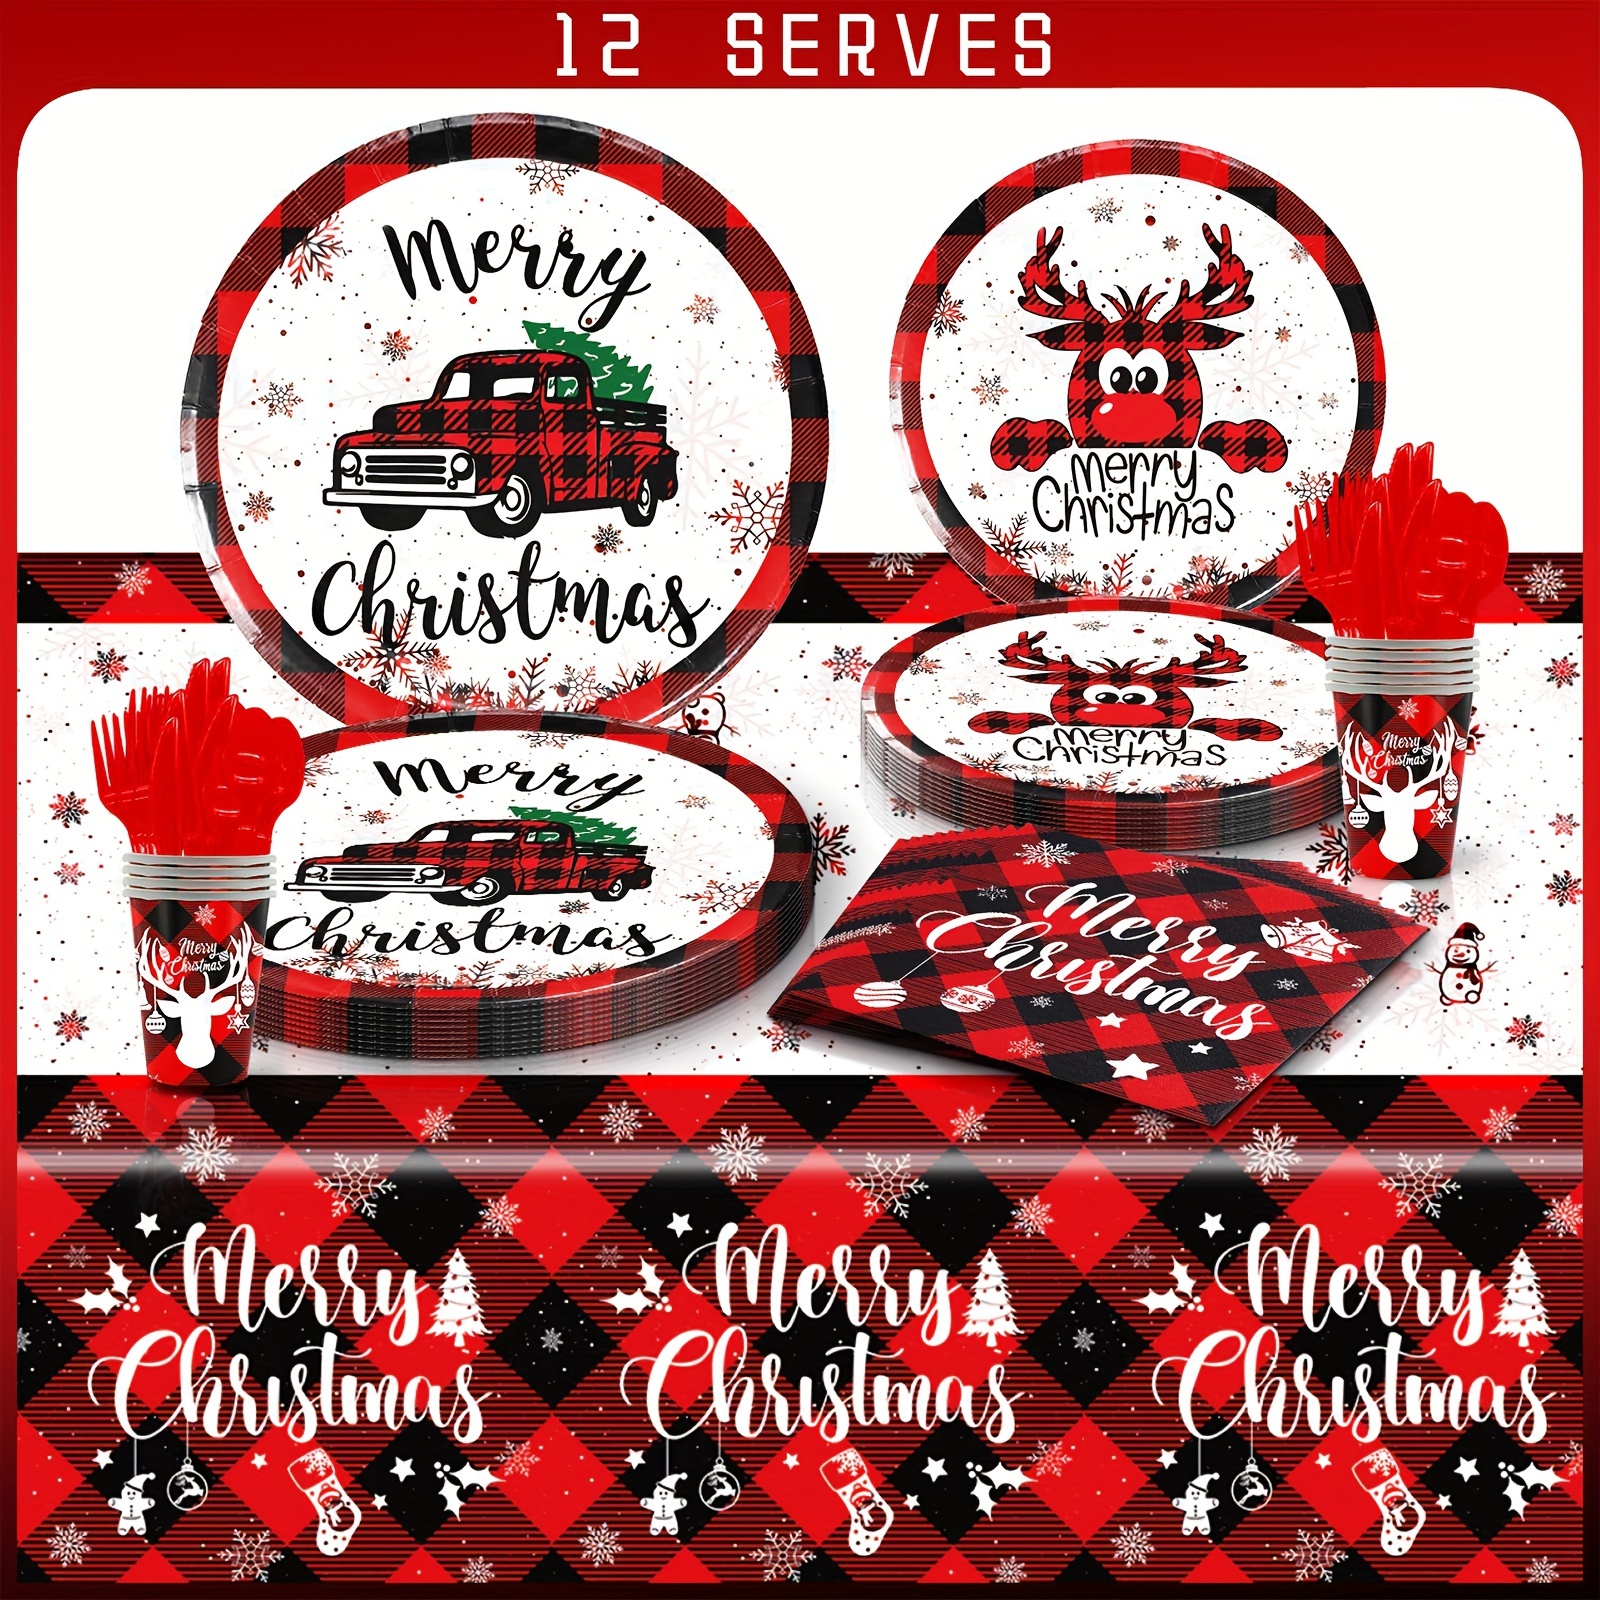 Christmas Paper Plates and Napkins Set - Disposable Dinnerware Table Decorations for Christmas Party, Includes Heavy Duty 9 inch Paper Plates, Cups